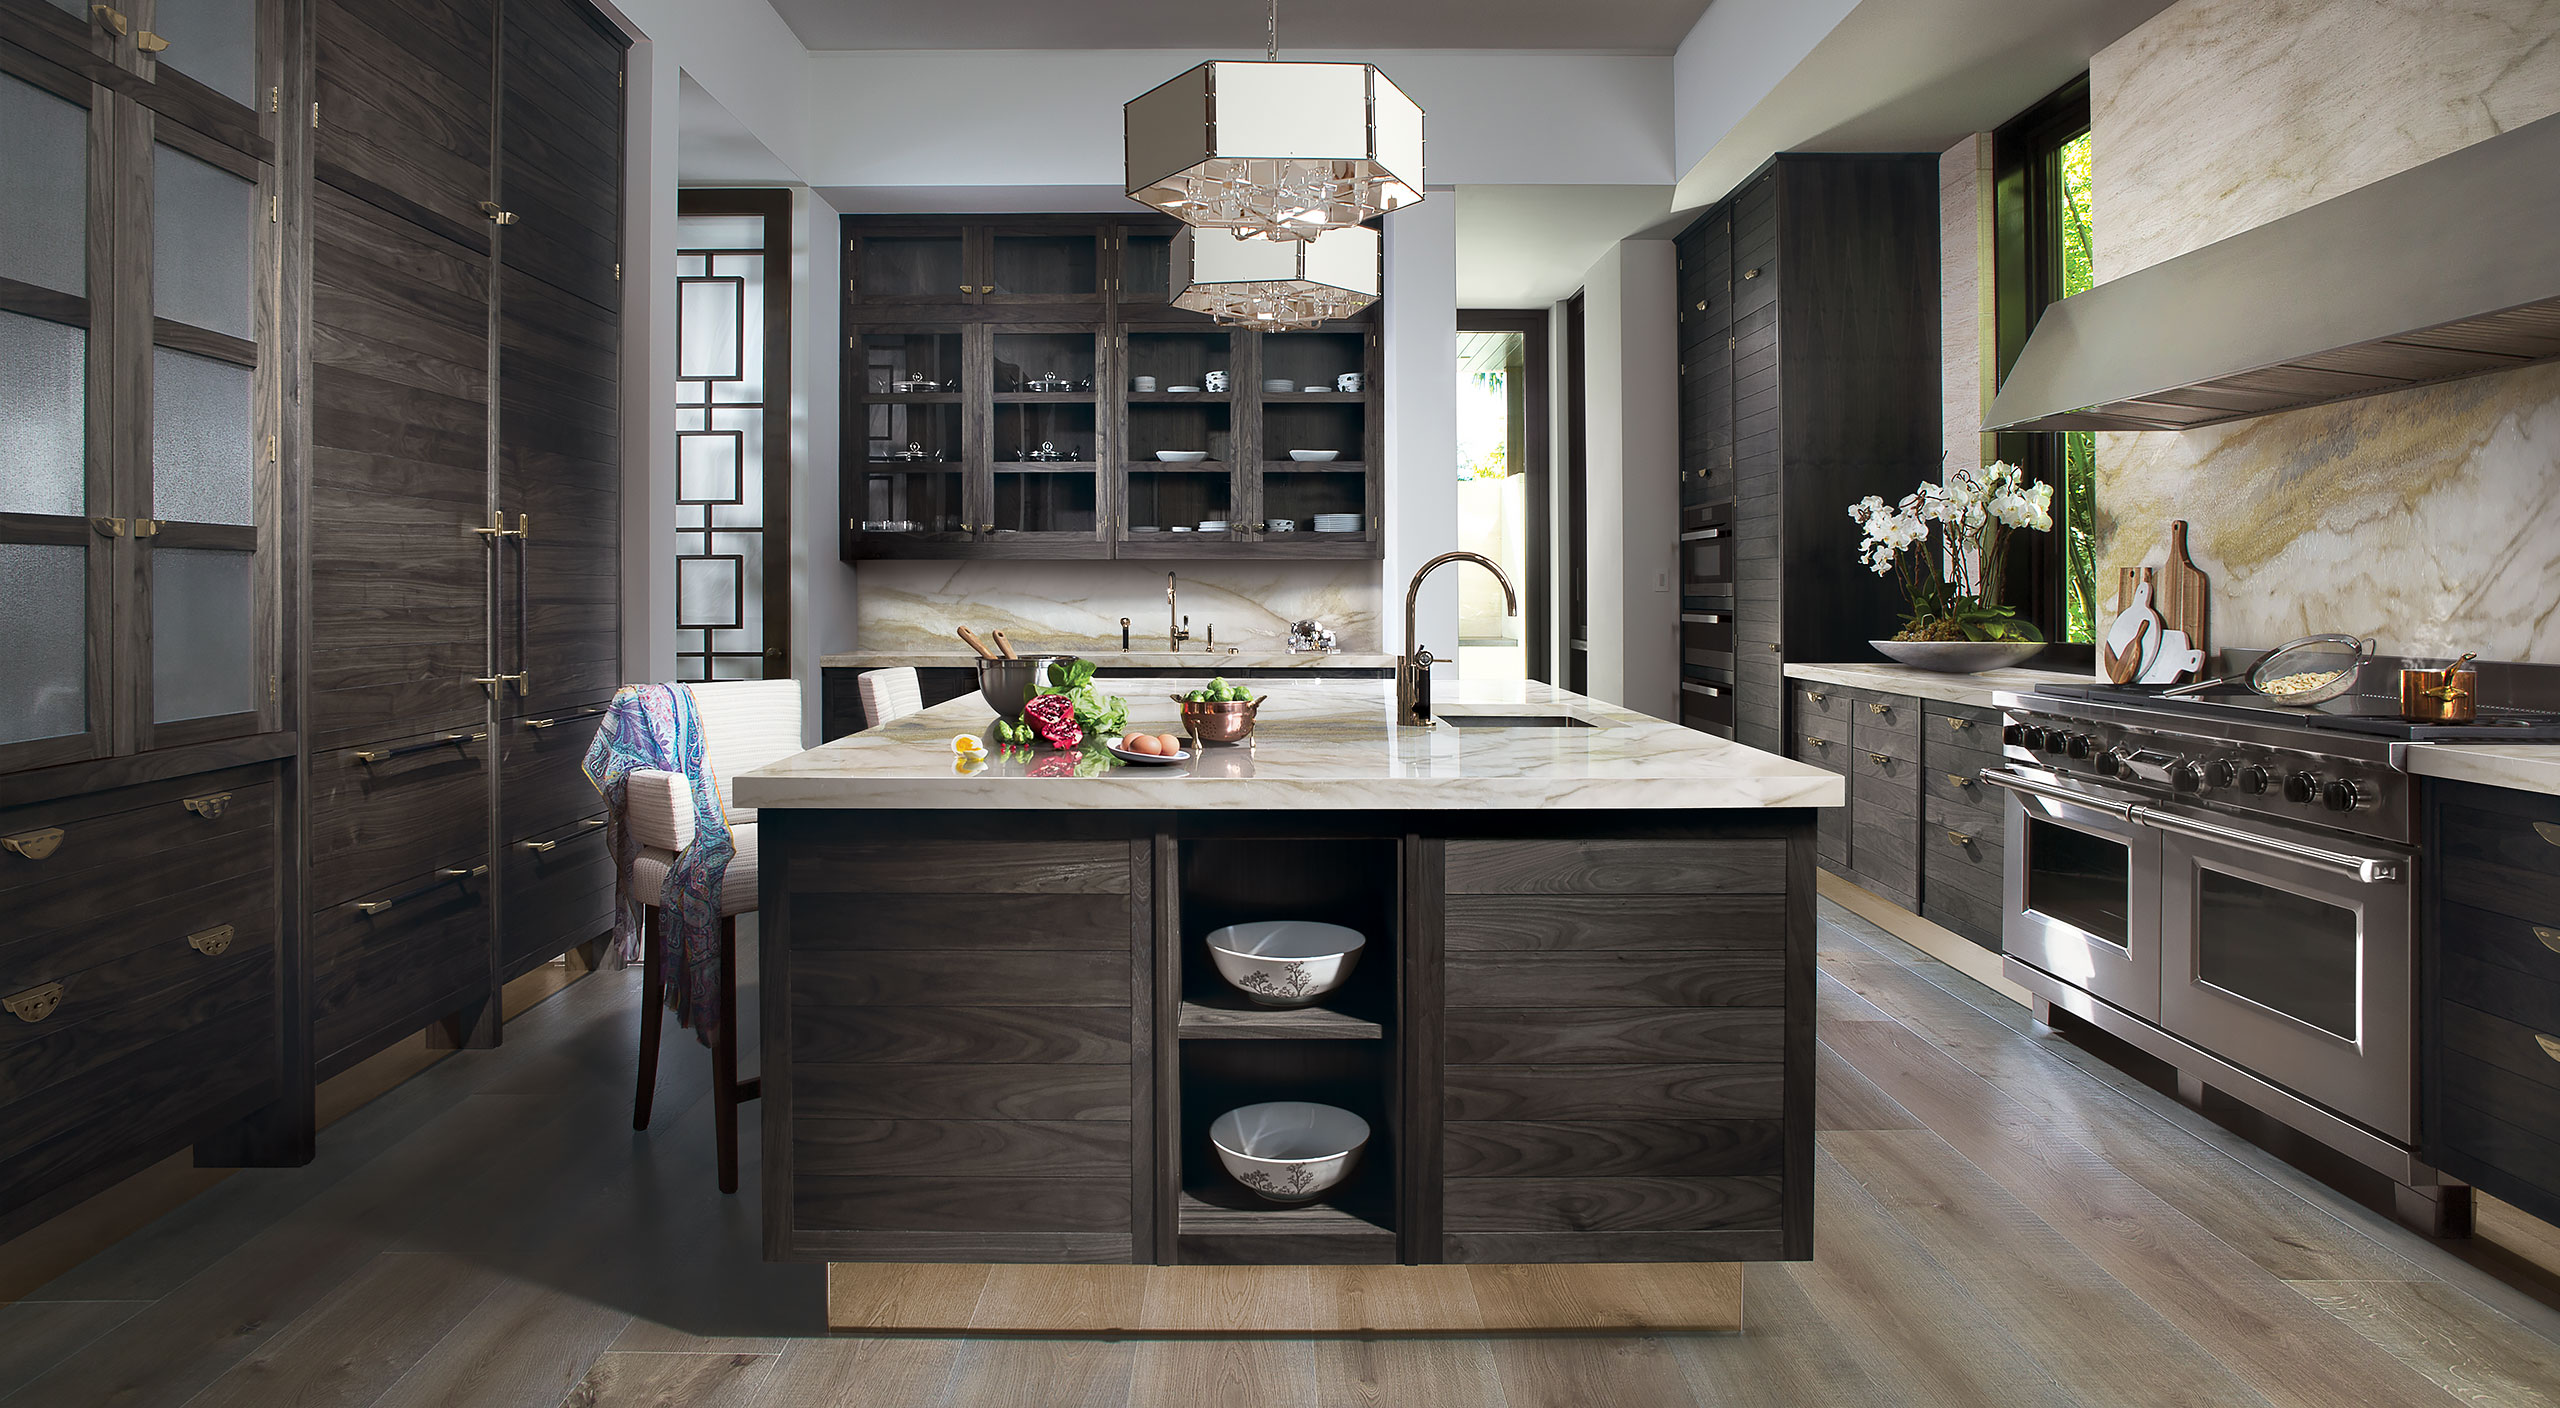 A Smallbone Napes collection kitchen withg grey stained oak cabinets and champange gold mirror plinths